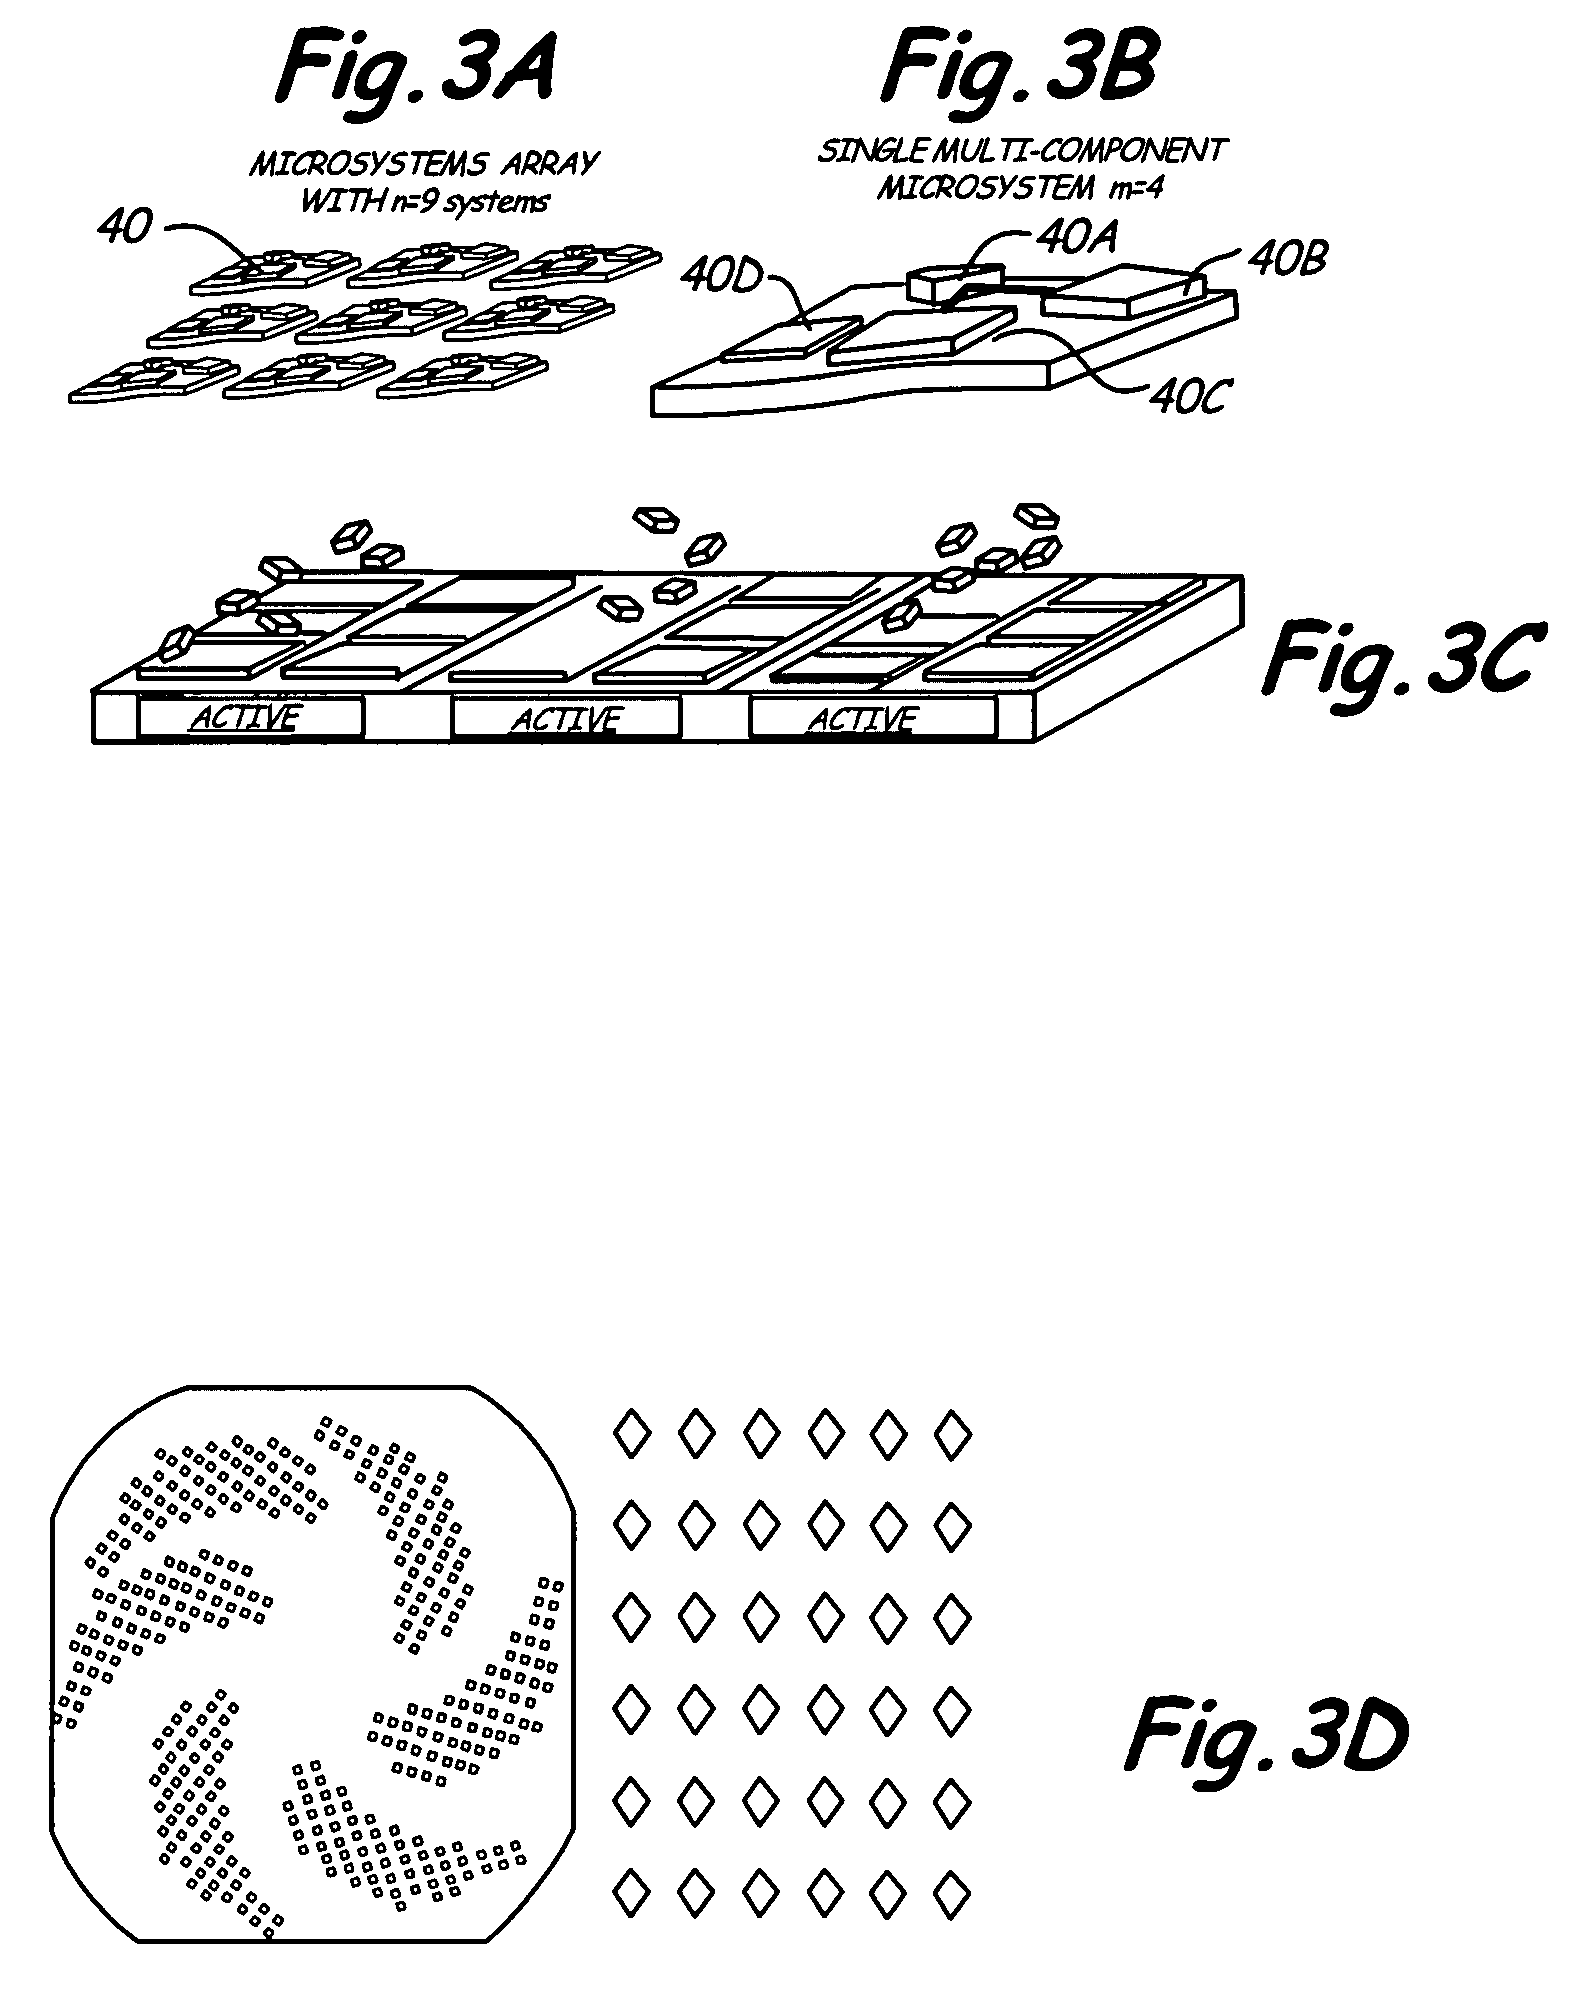 Method of self-assembly on a surface